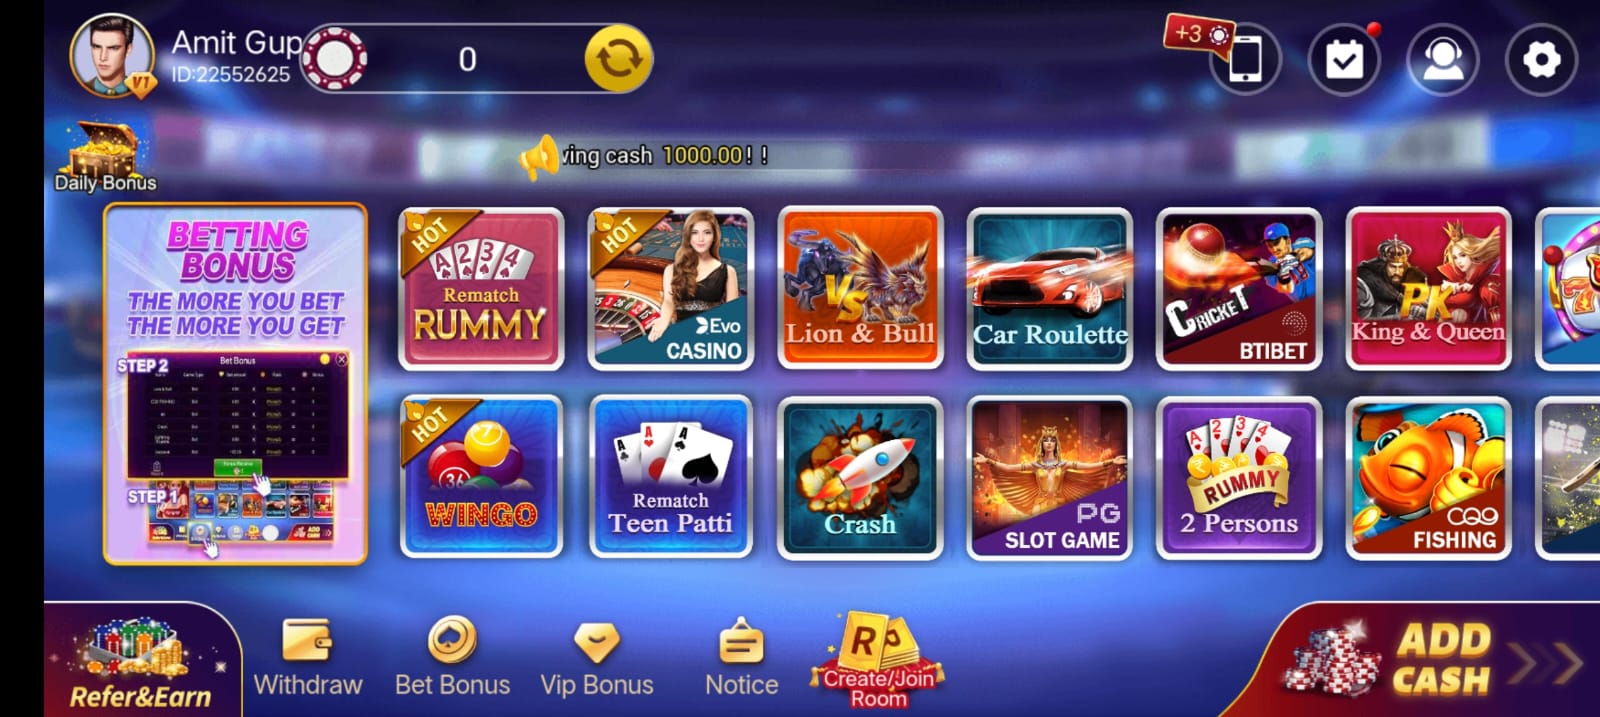 Available Games In Rummy Pub Application